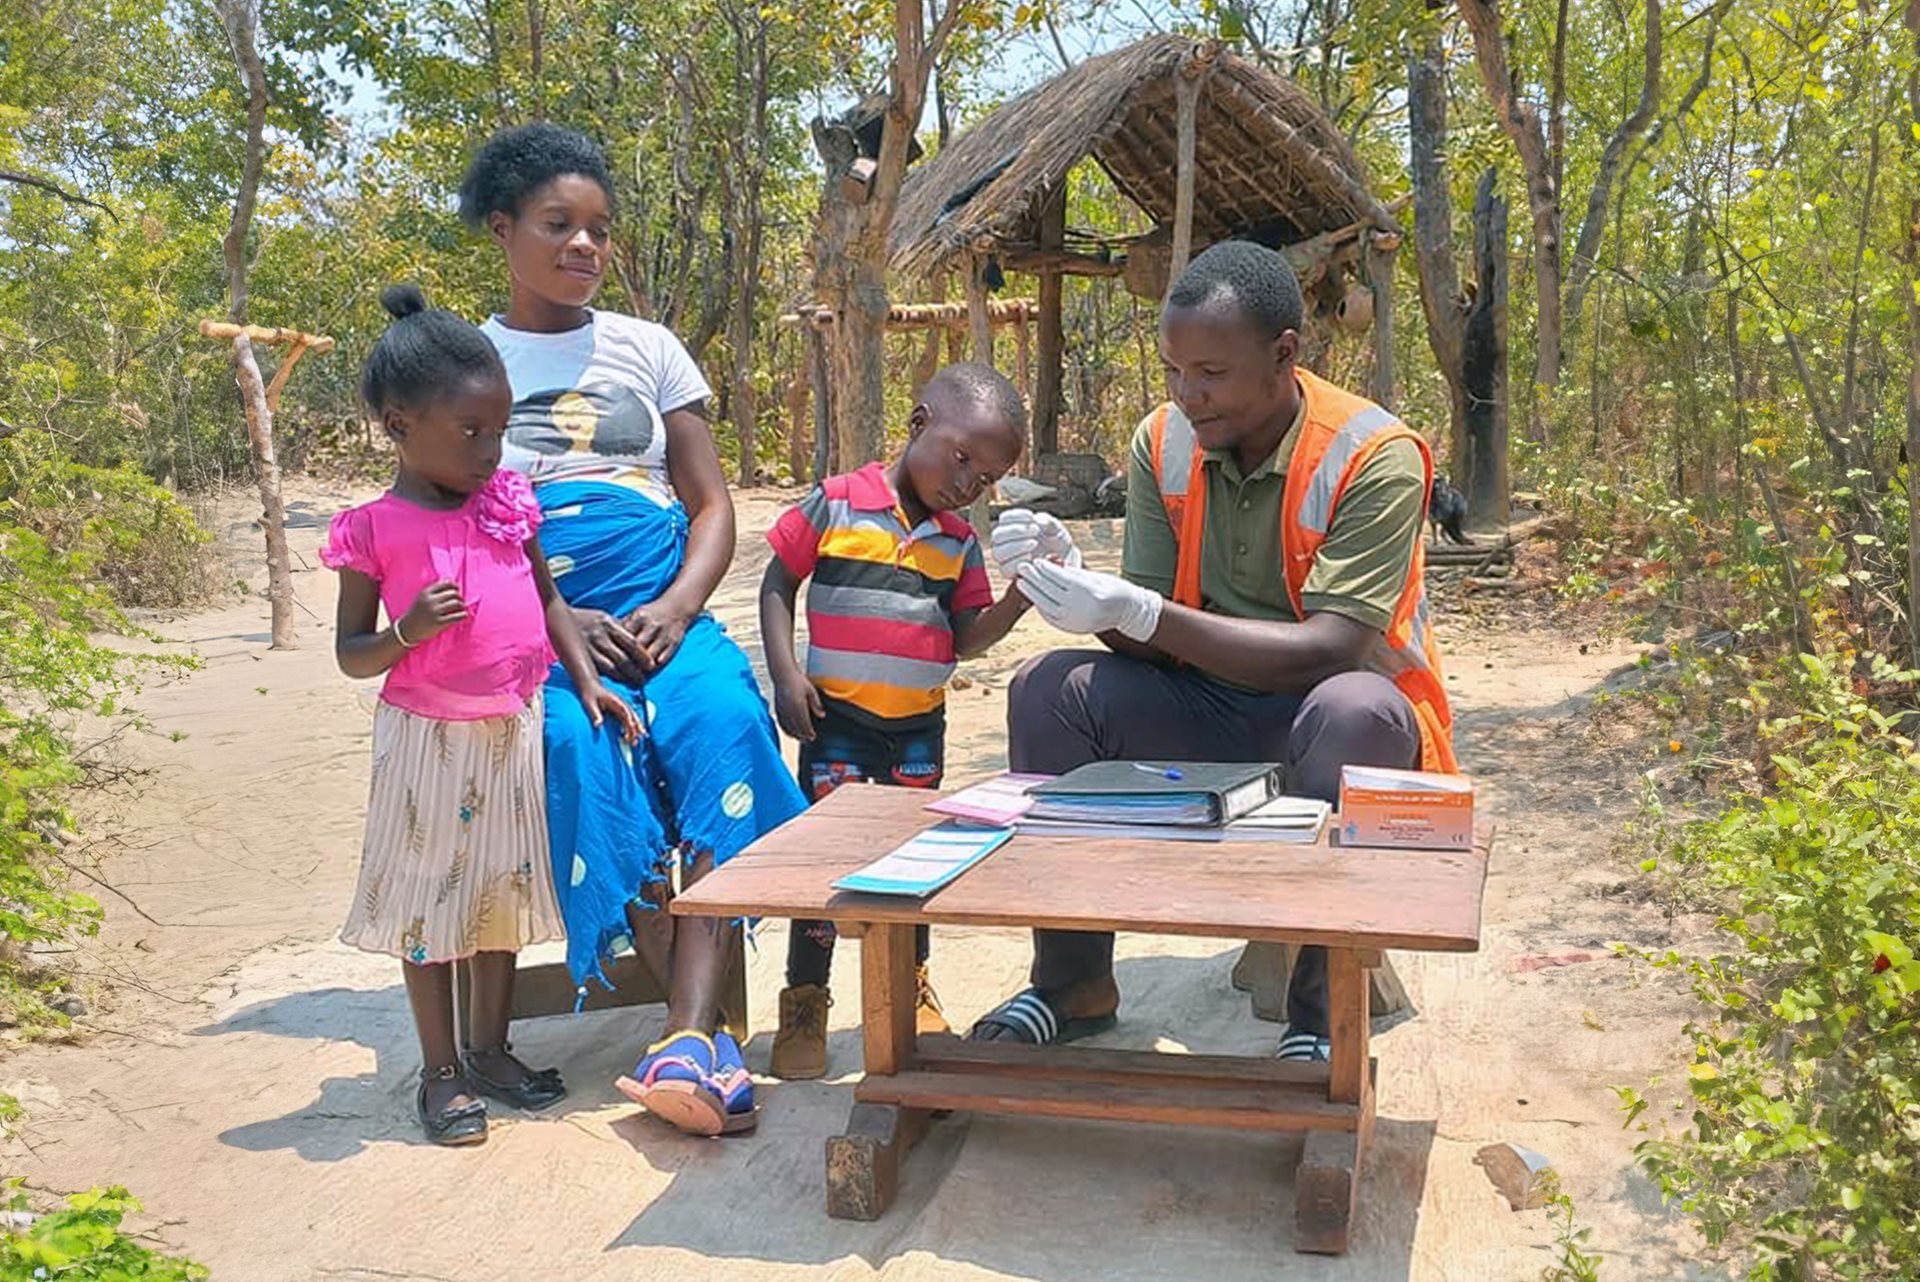 A child and his family receiving a medical checkup.